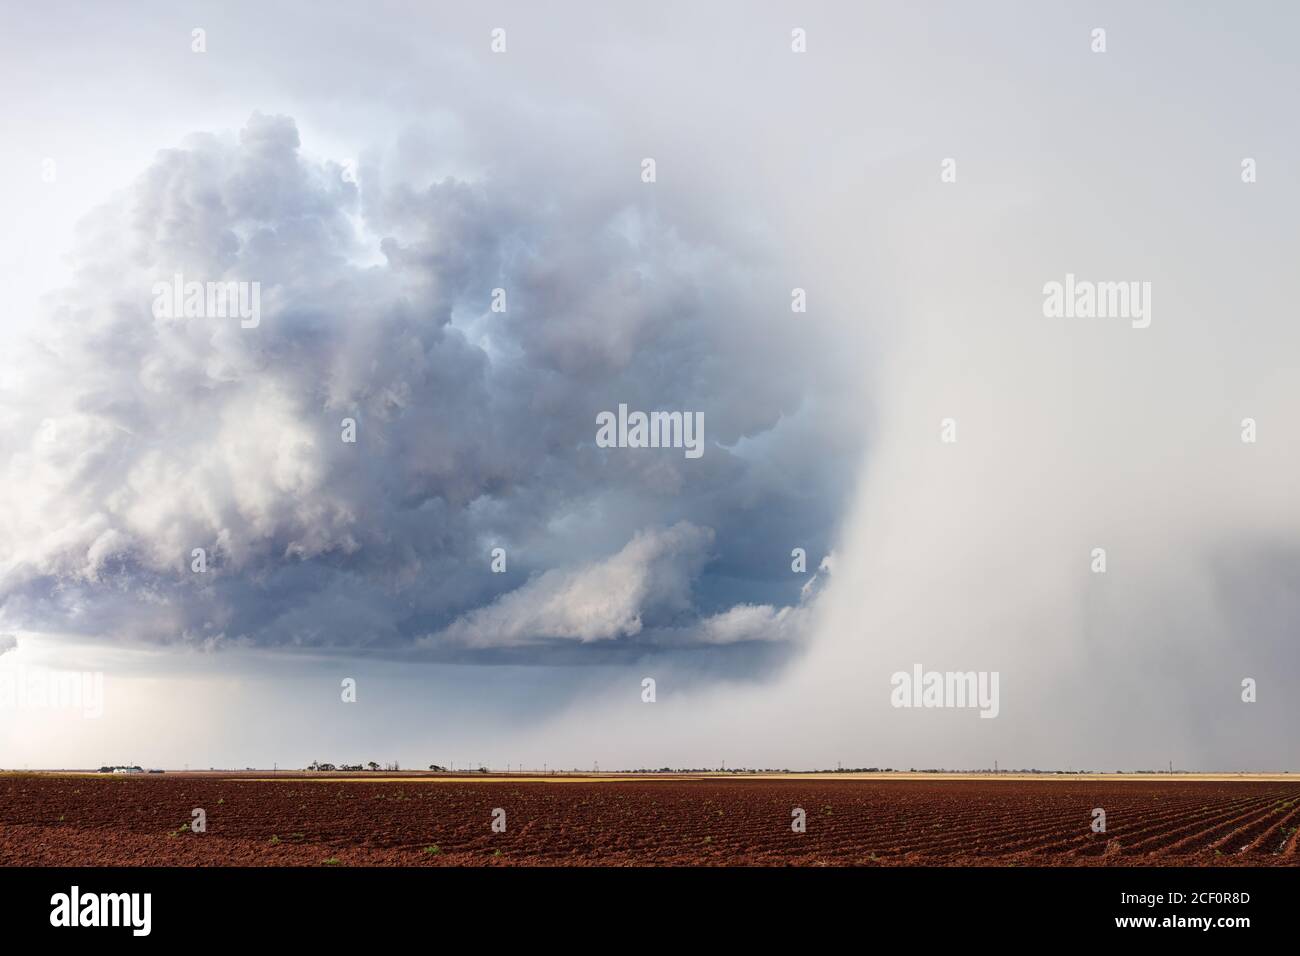 Hail storm with dramatic clouds over a farm field in Littlefield, Texas, USA Stock Photo